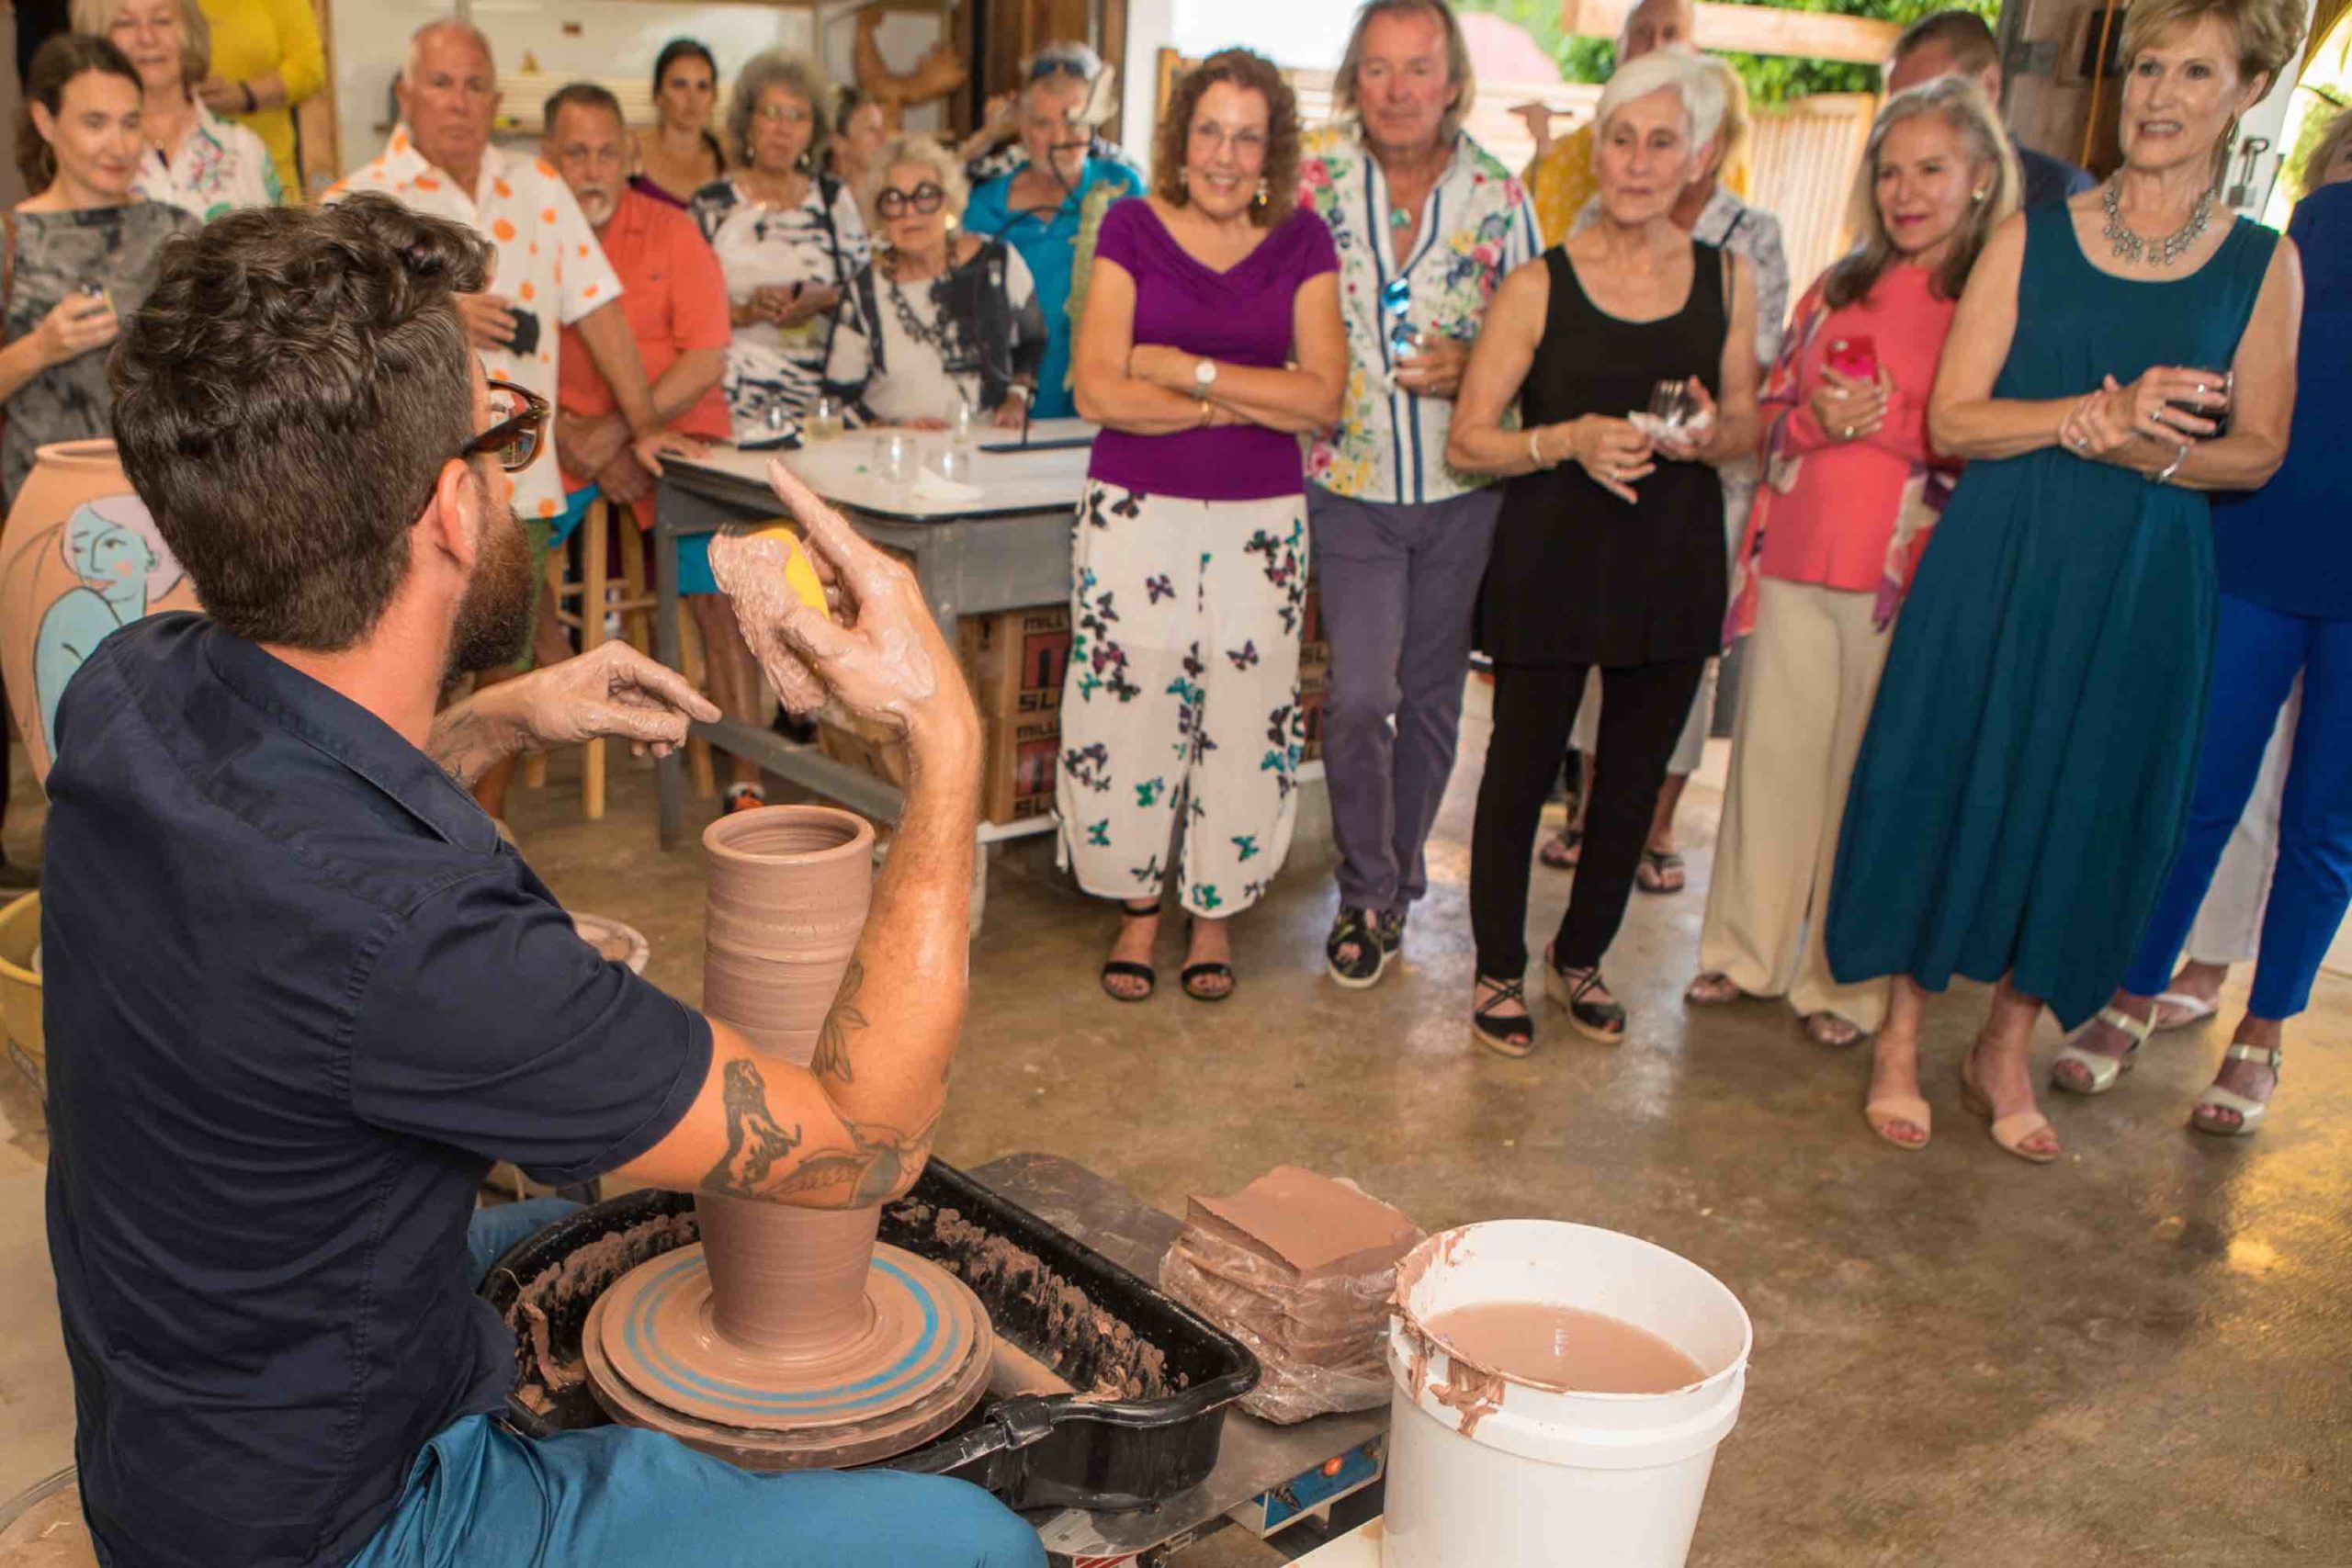 People stading watching a ceramic potter sitting at a wheel making a pot